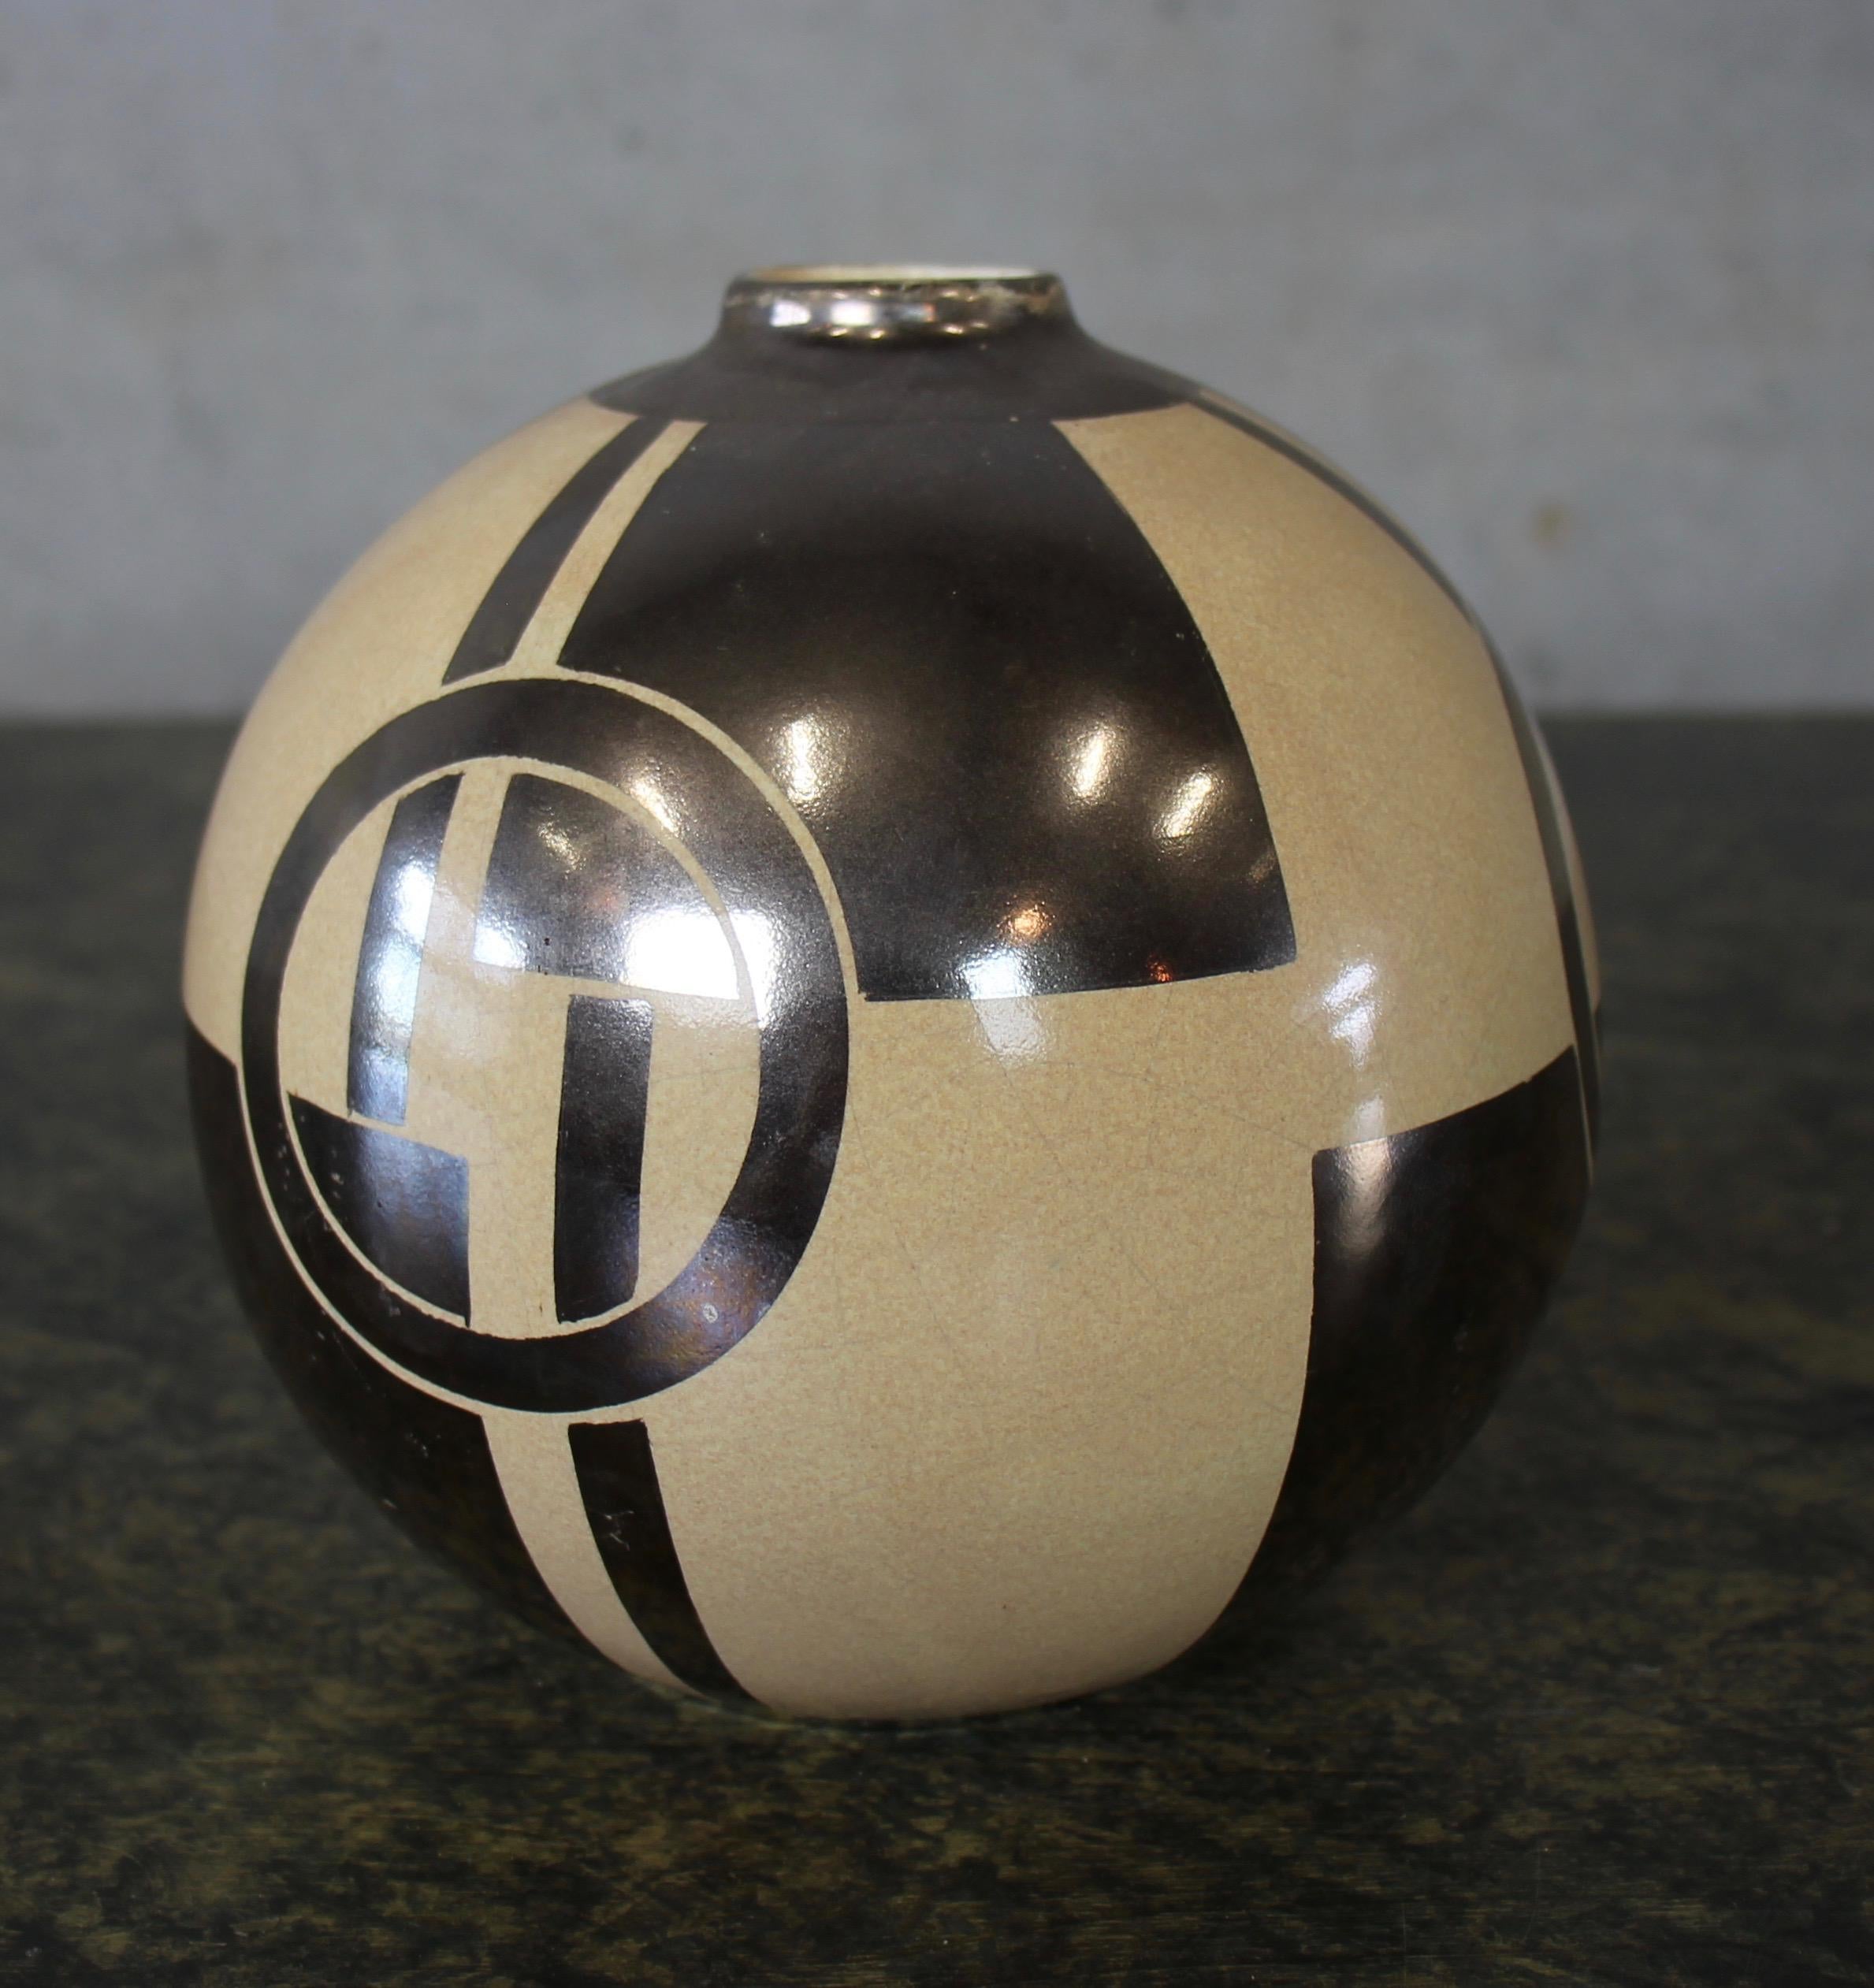 This French Art Deco vase dates back to the 1920s and impresses with its clear and graphic design. The ceramic itself has a bright glaze and the pattern shines silver. Even without flowers, the vase is an eye-catcher and beautiful Accsoir on a